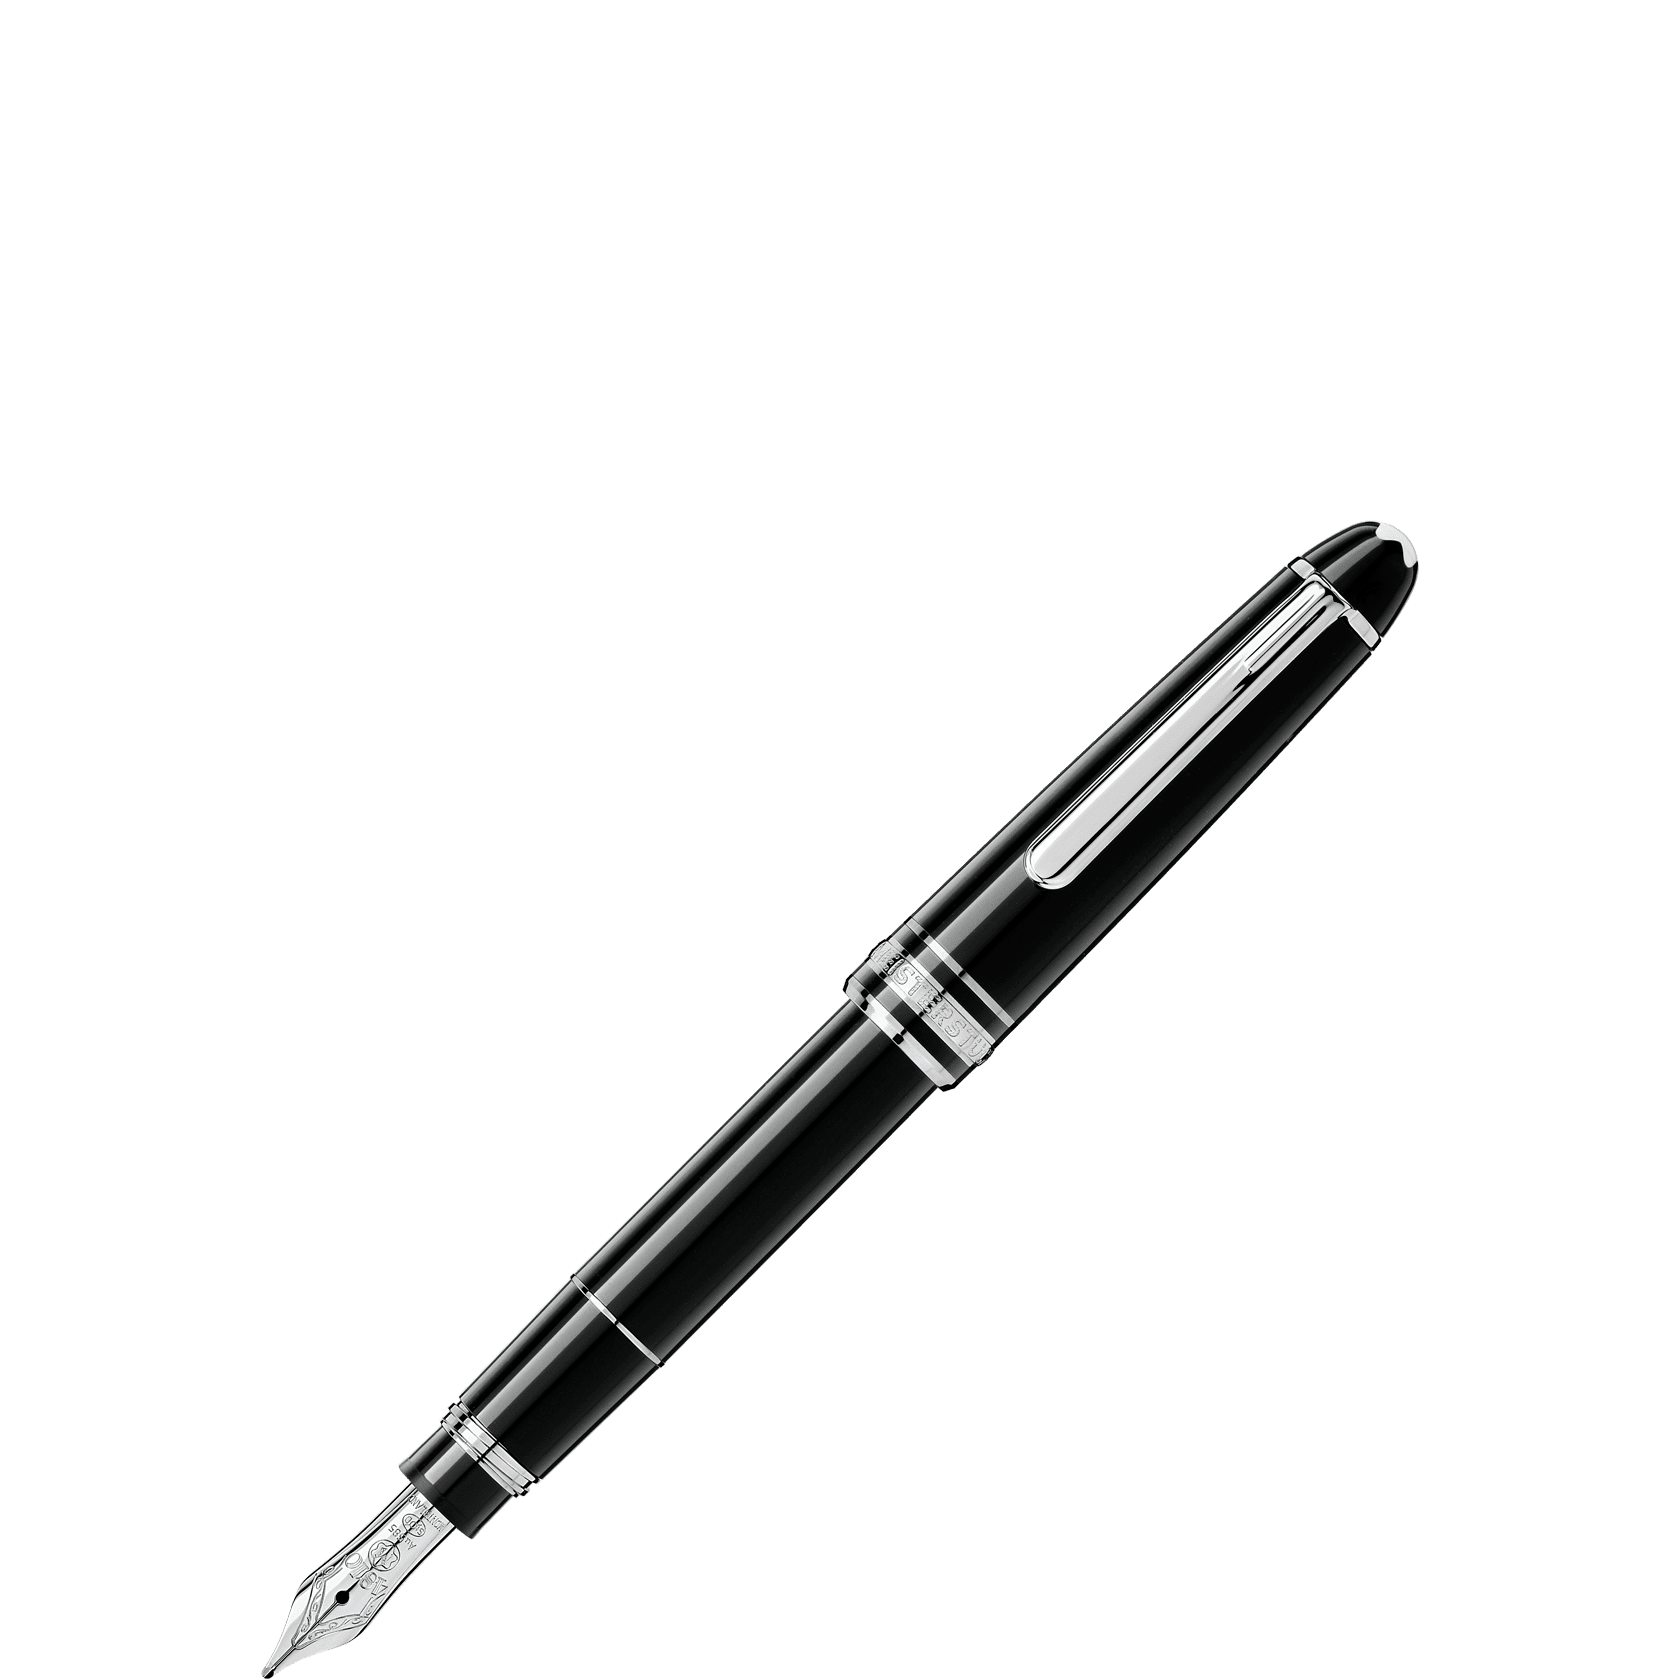 MeisterstÃ¼ck Platinum Line Homage to W.A. Mozart Fountain Pen (small size)